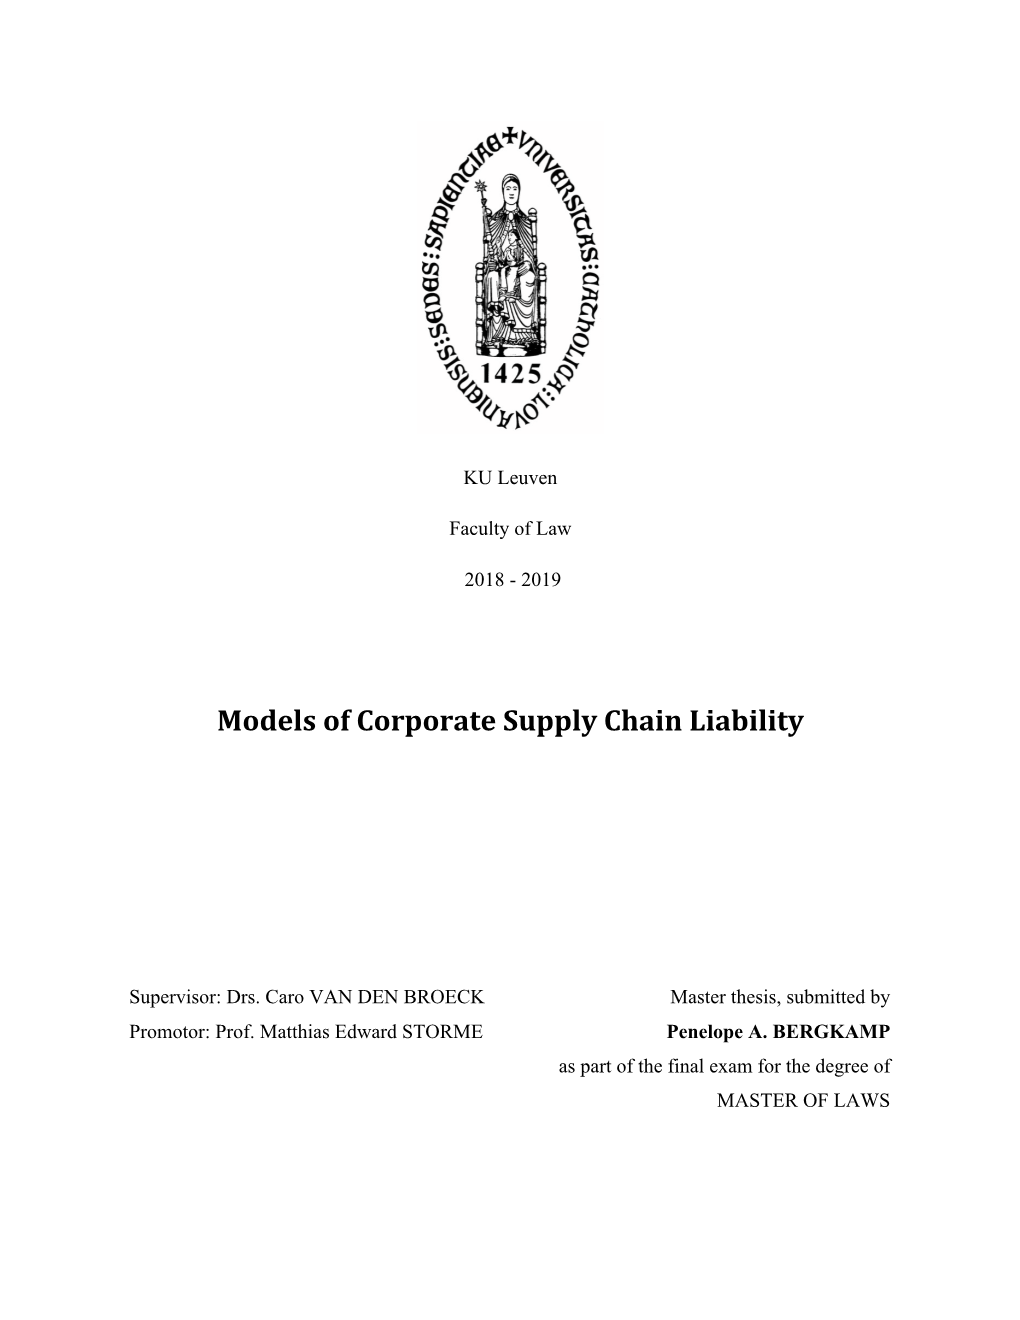 Models of Corporate Supply Chain Liability